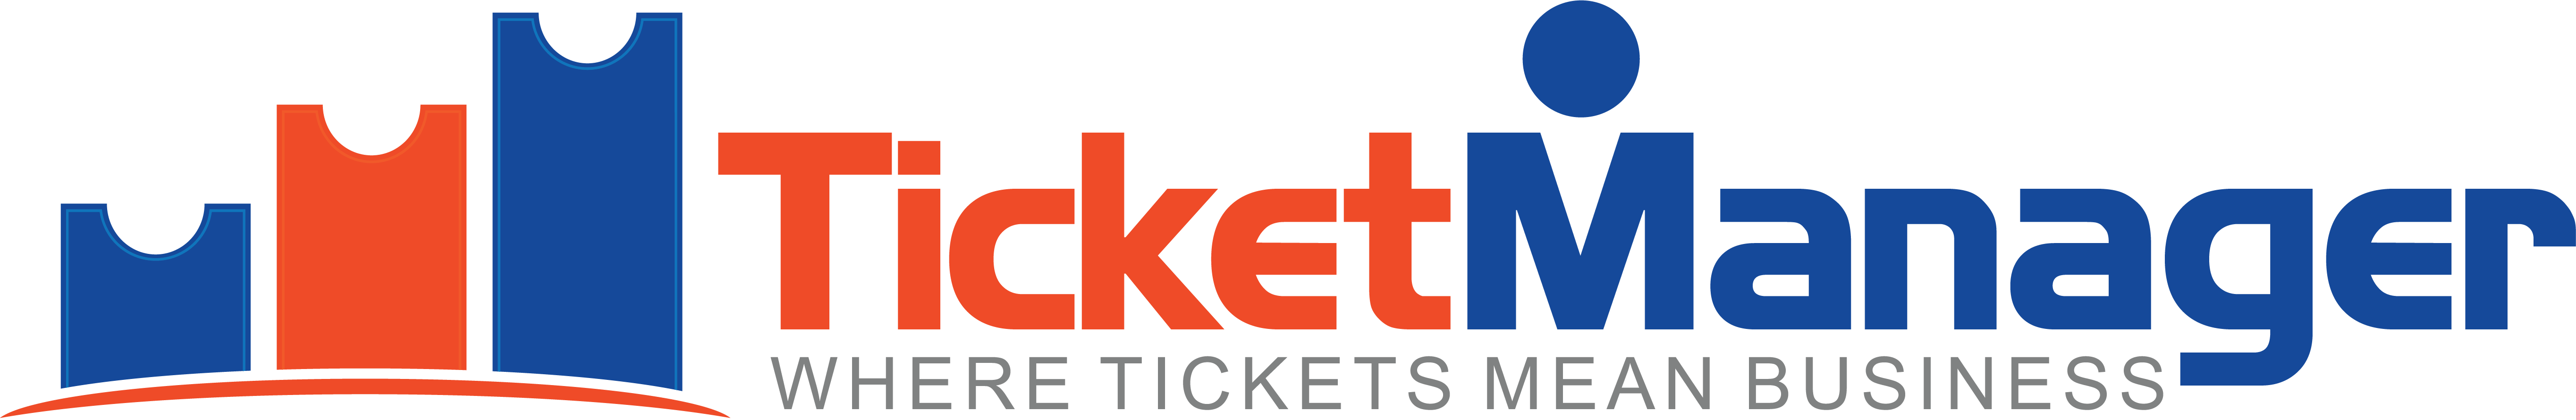 TicketManager | Executive Overview